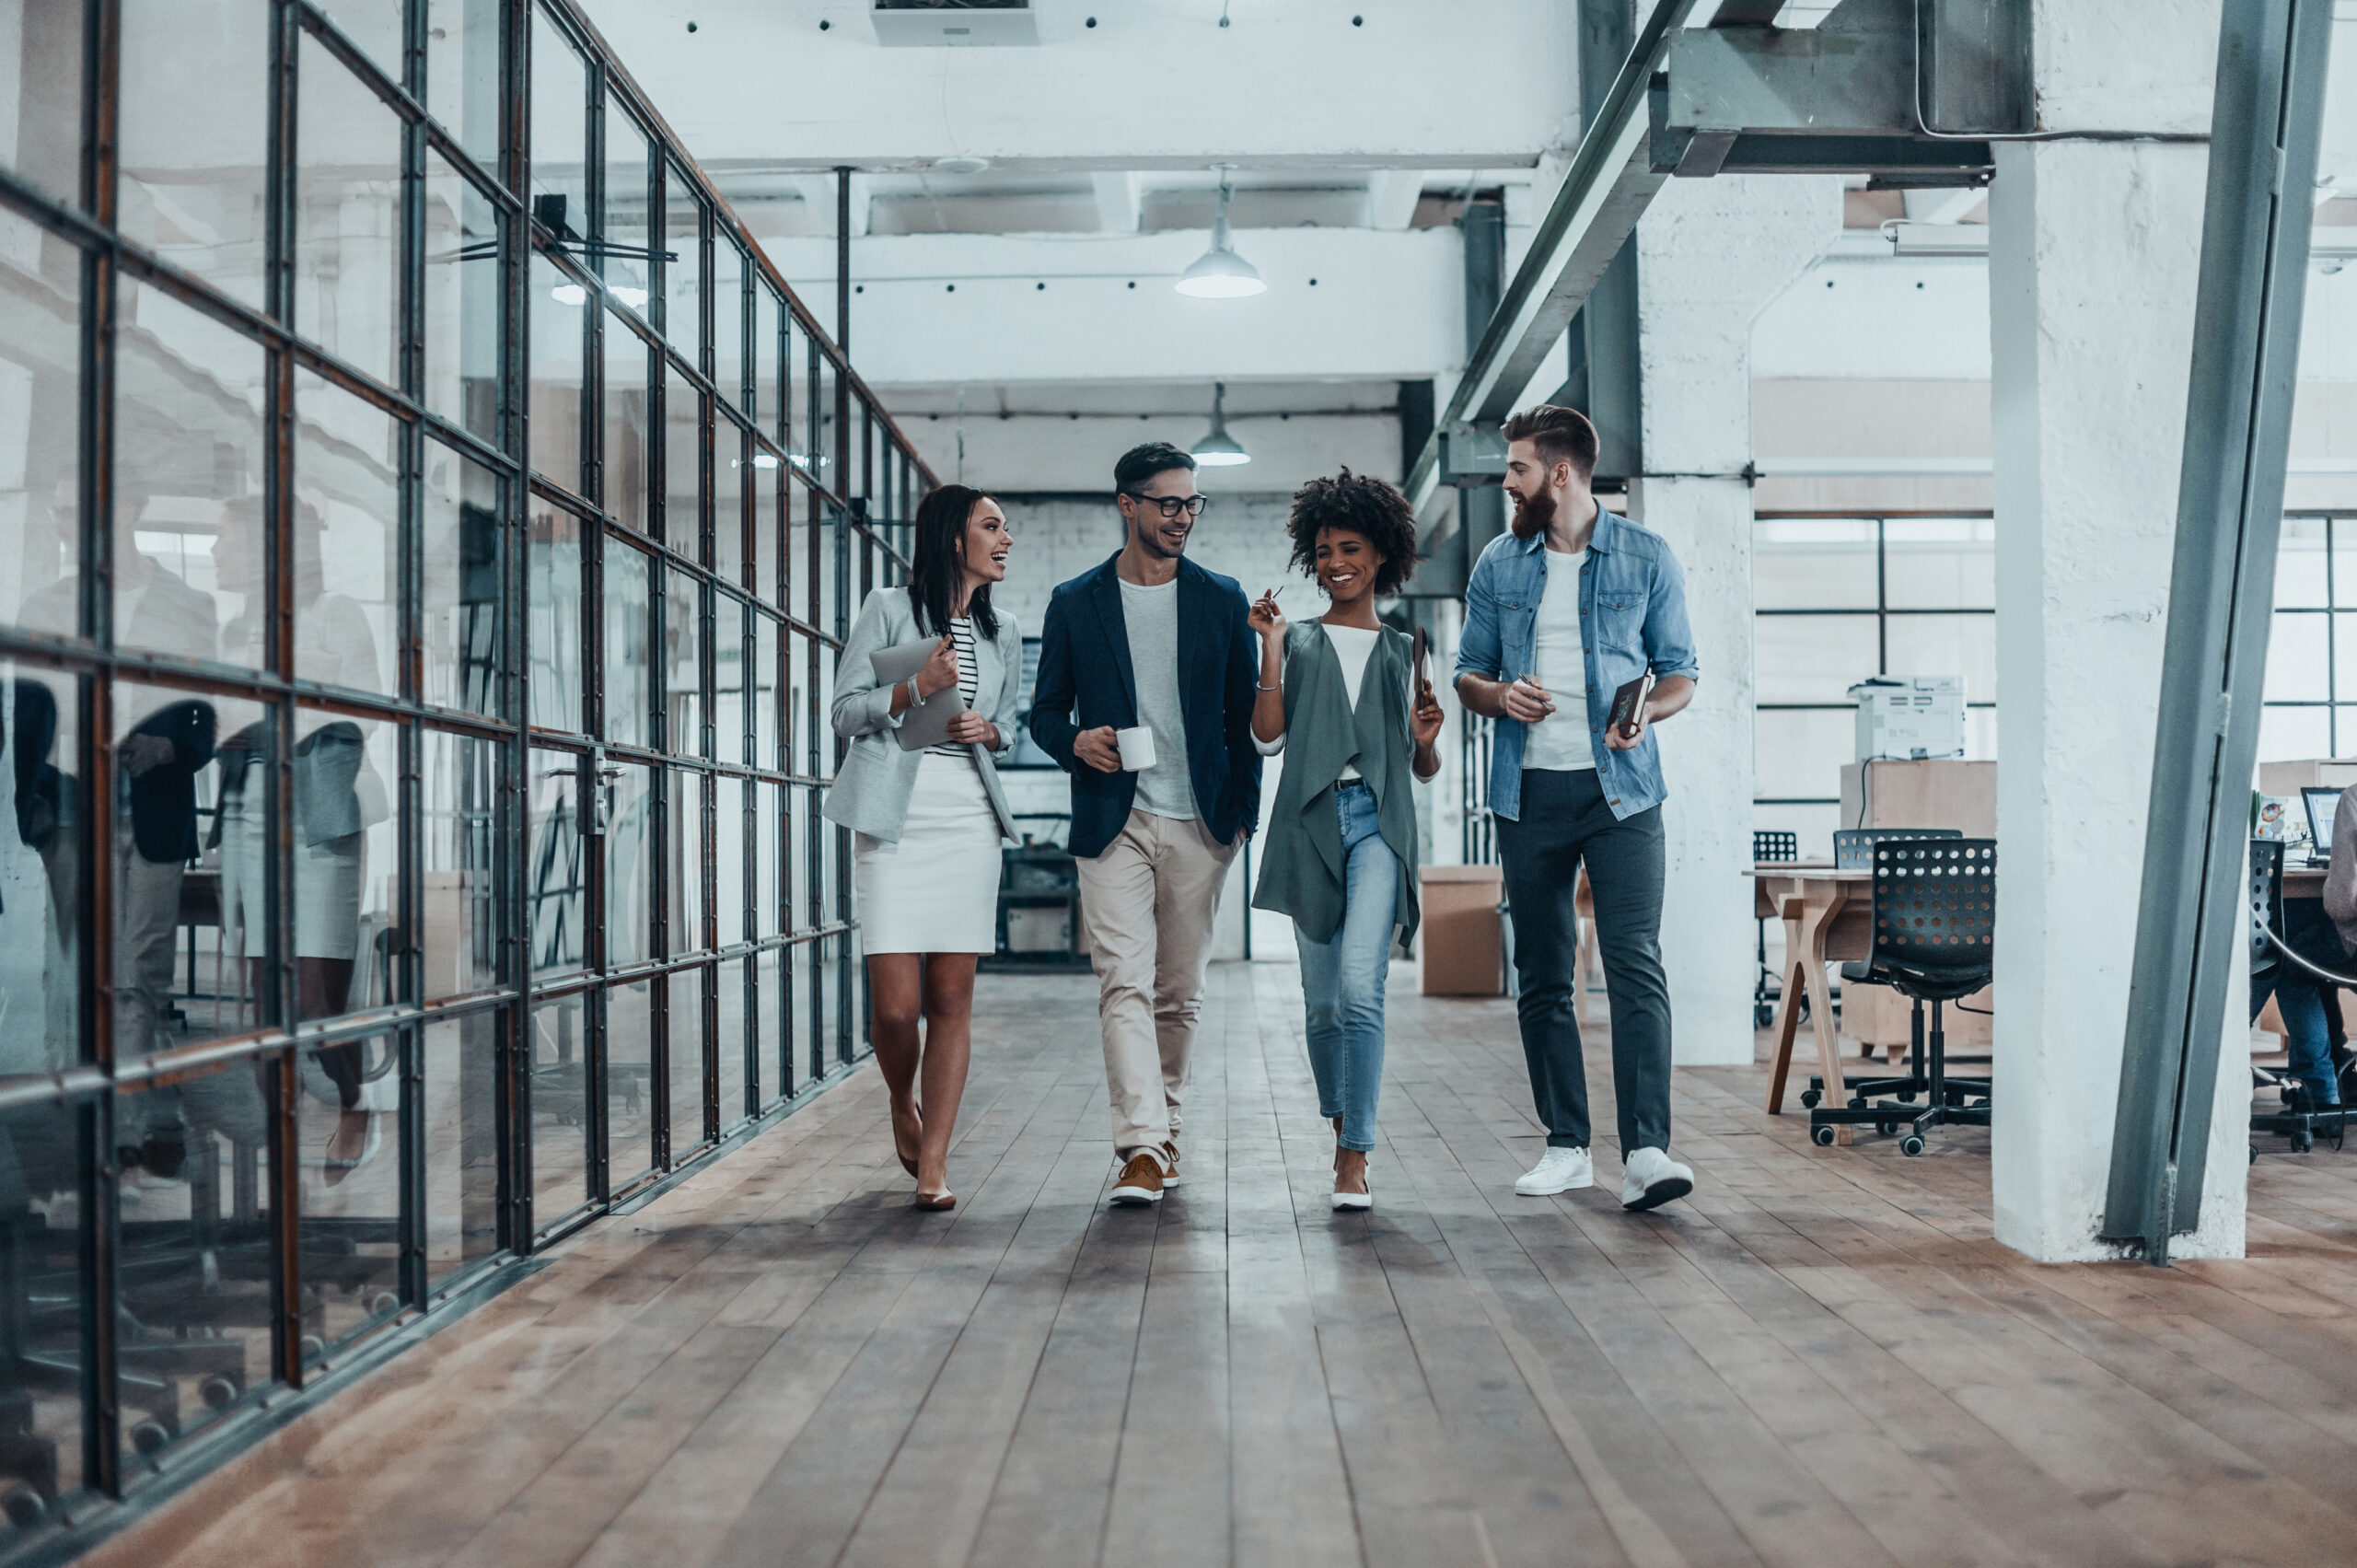 Coworking spaces are on the rise at the moment. However, not many students view them as places to study. See five ideas on how to attract more students to coworking spaces.